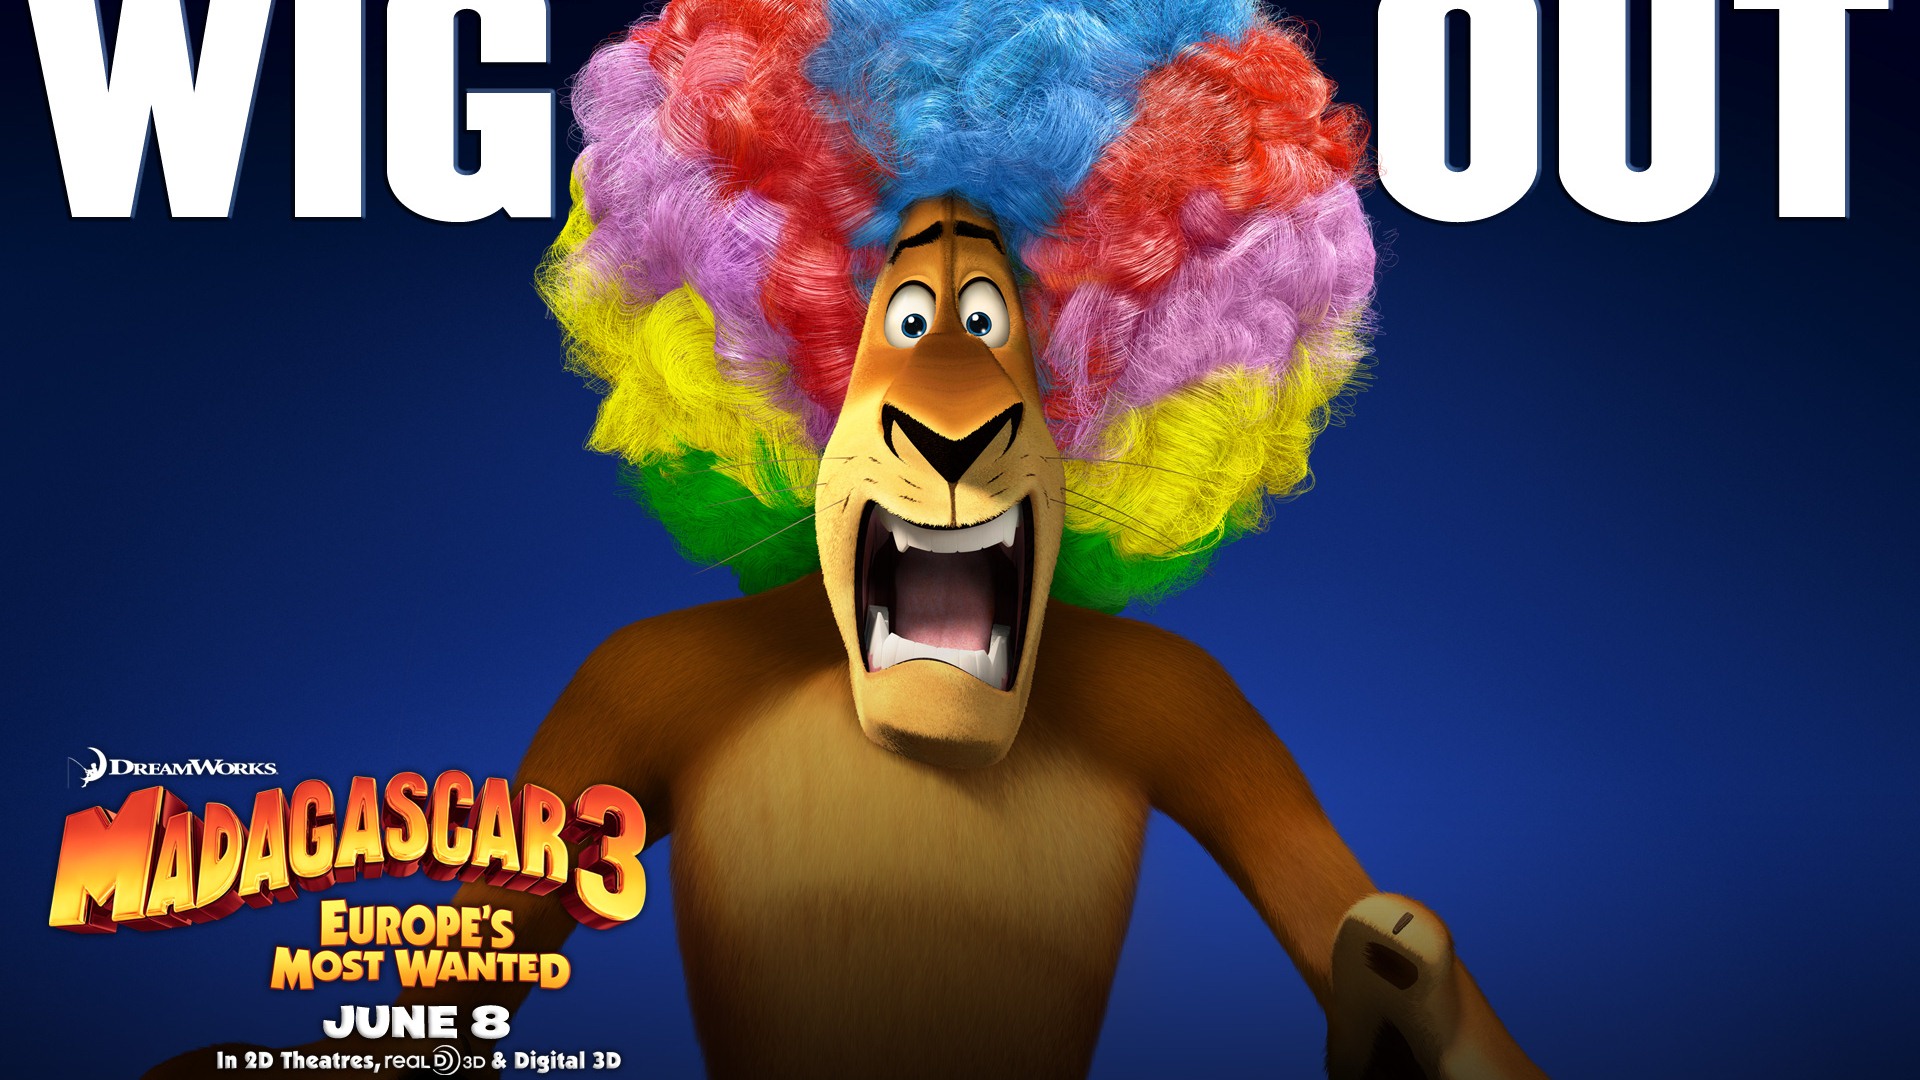 Madagascar 3: Europe's Most Wanted HD wallpapers #11 - 1920x1080